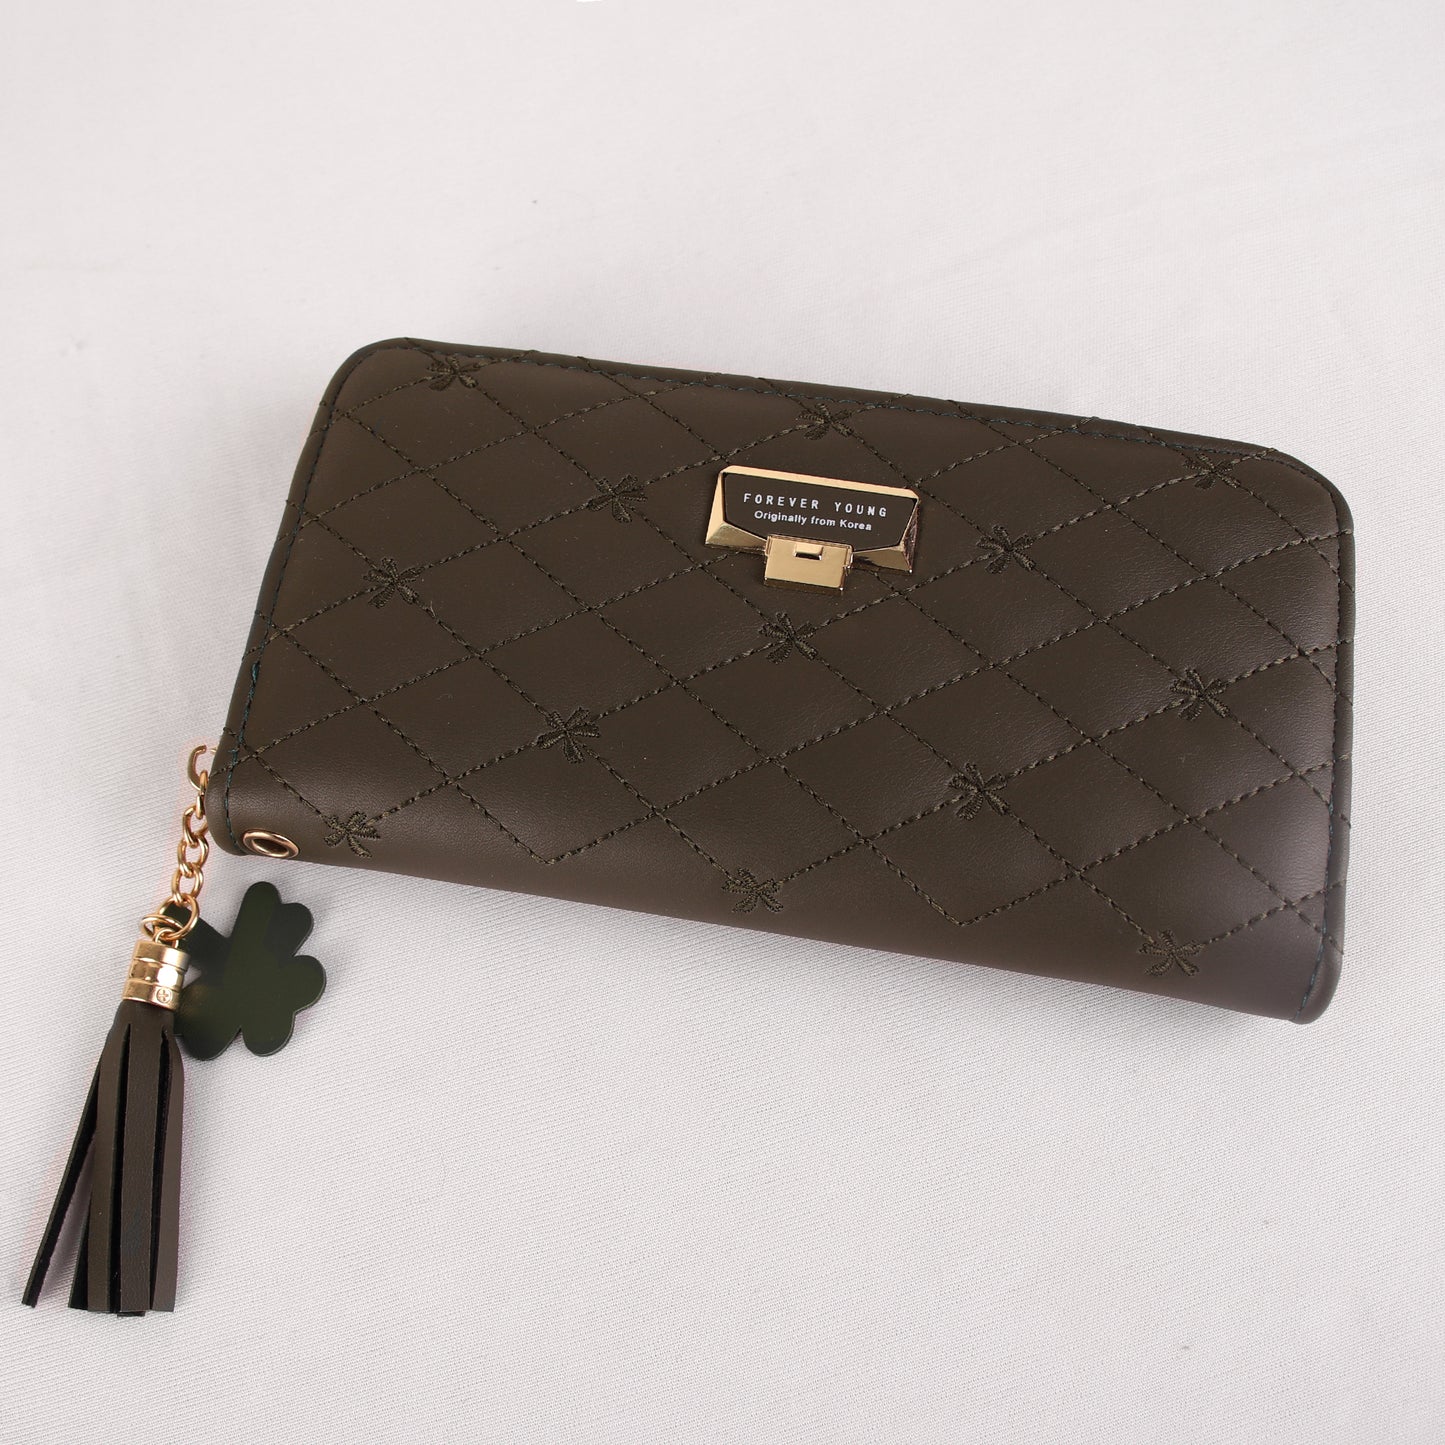 The Boxy inverted Clamped wallet with Tassels in Green